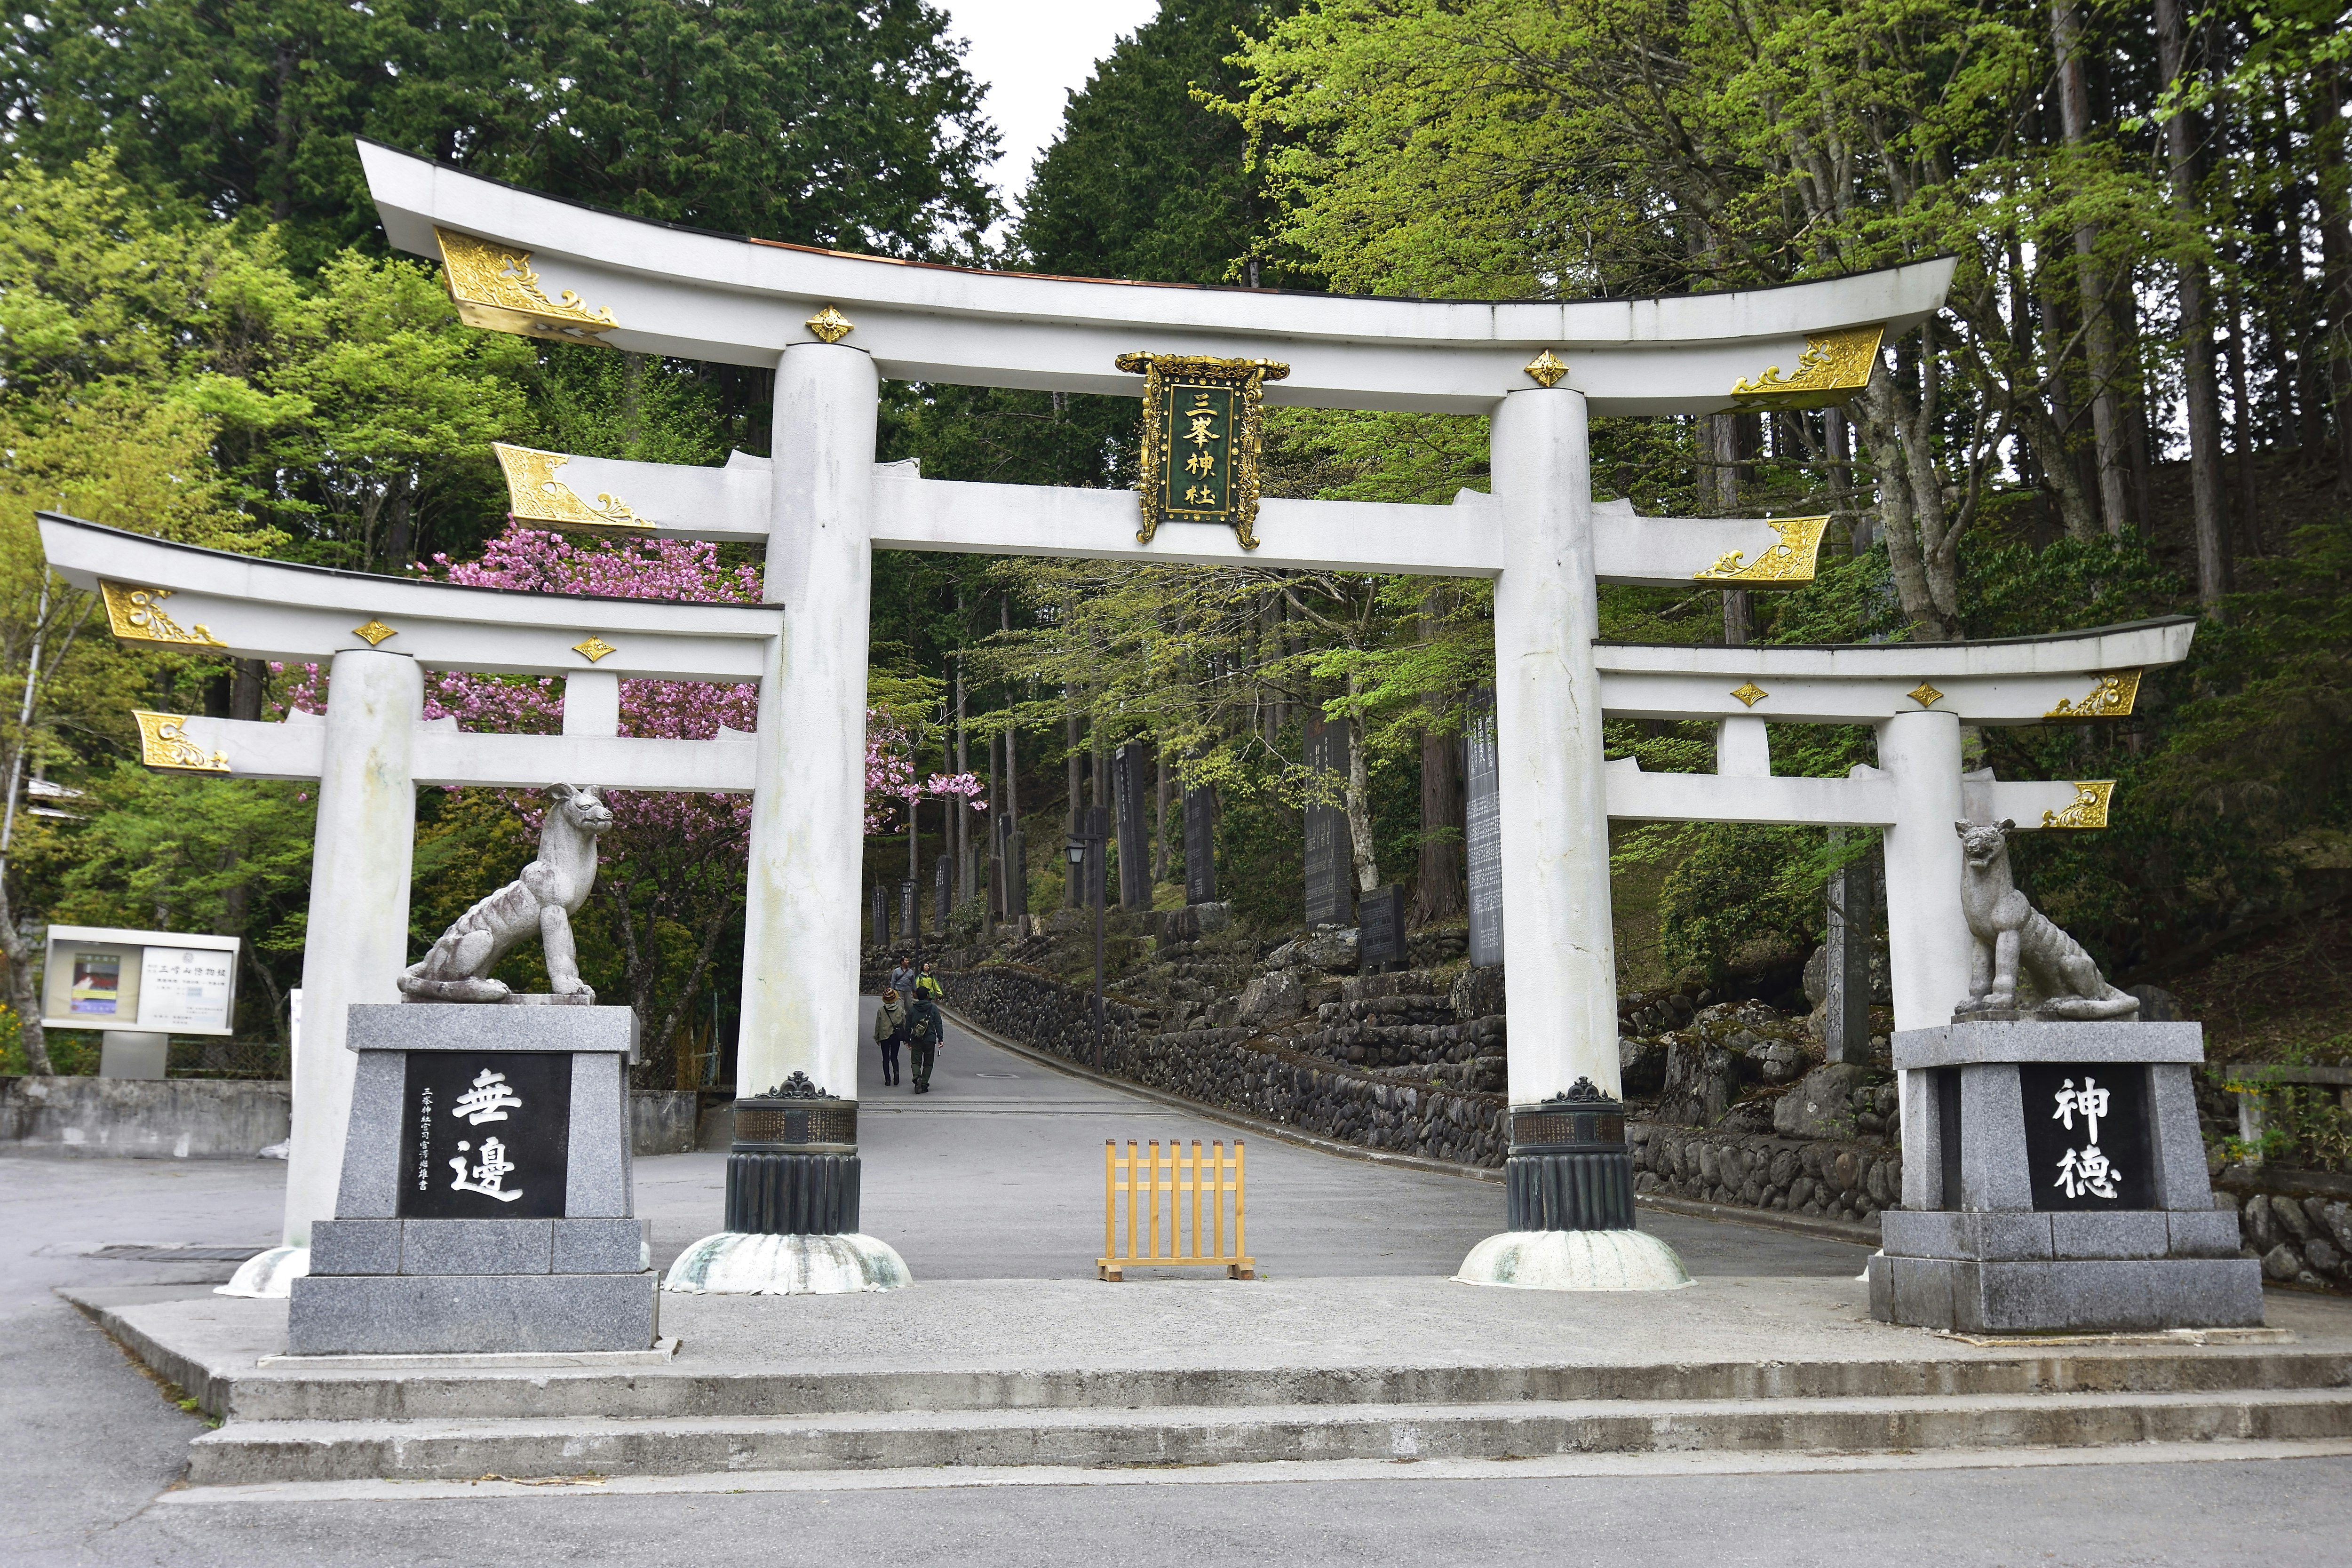 The entrance to the Mitsumine-jinja Shinto shrine. A traditional Japanese stone archway stands with a statue of a wolf either side of it. 